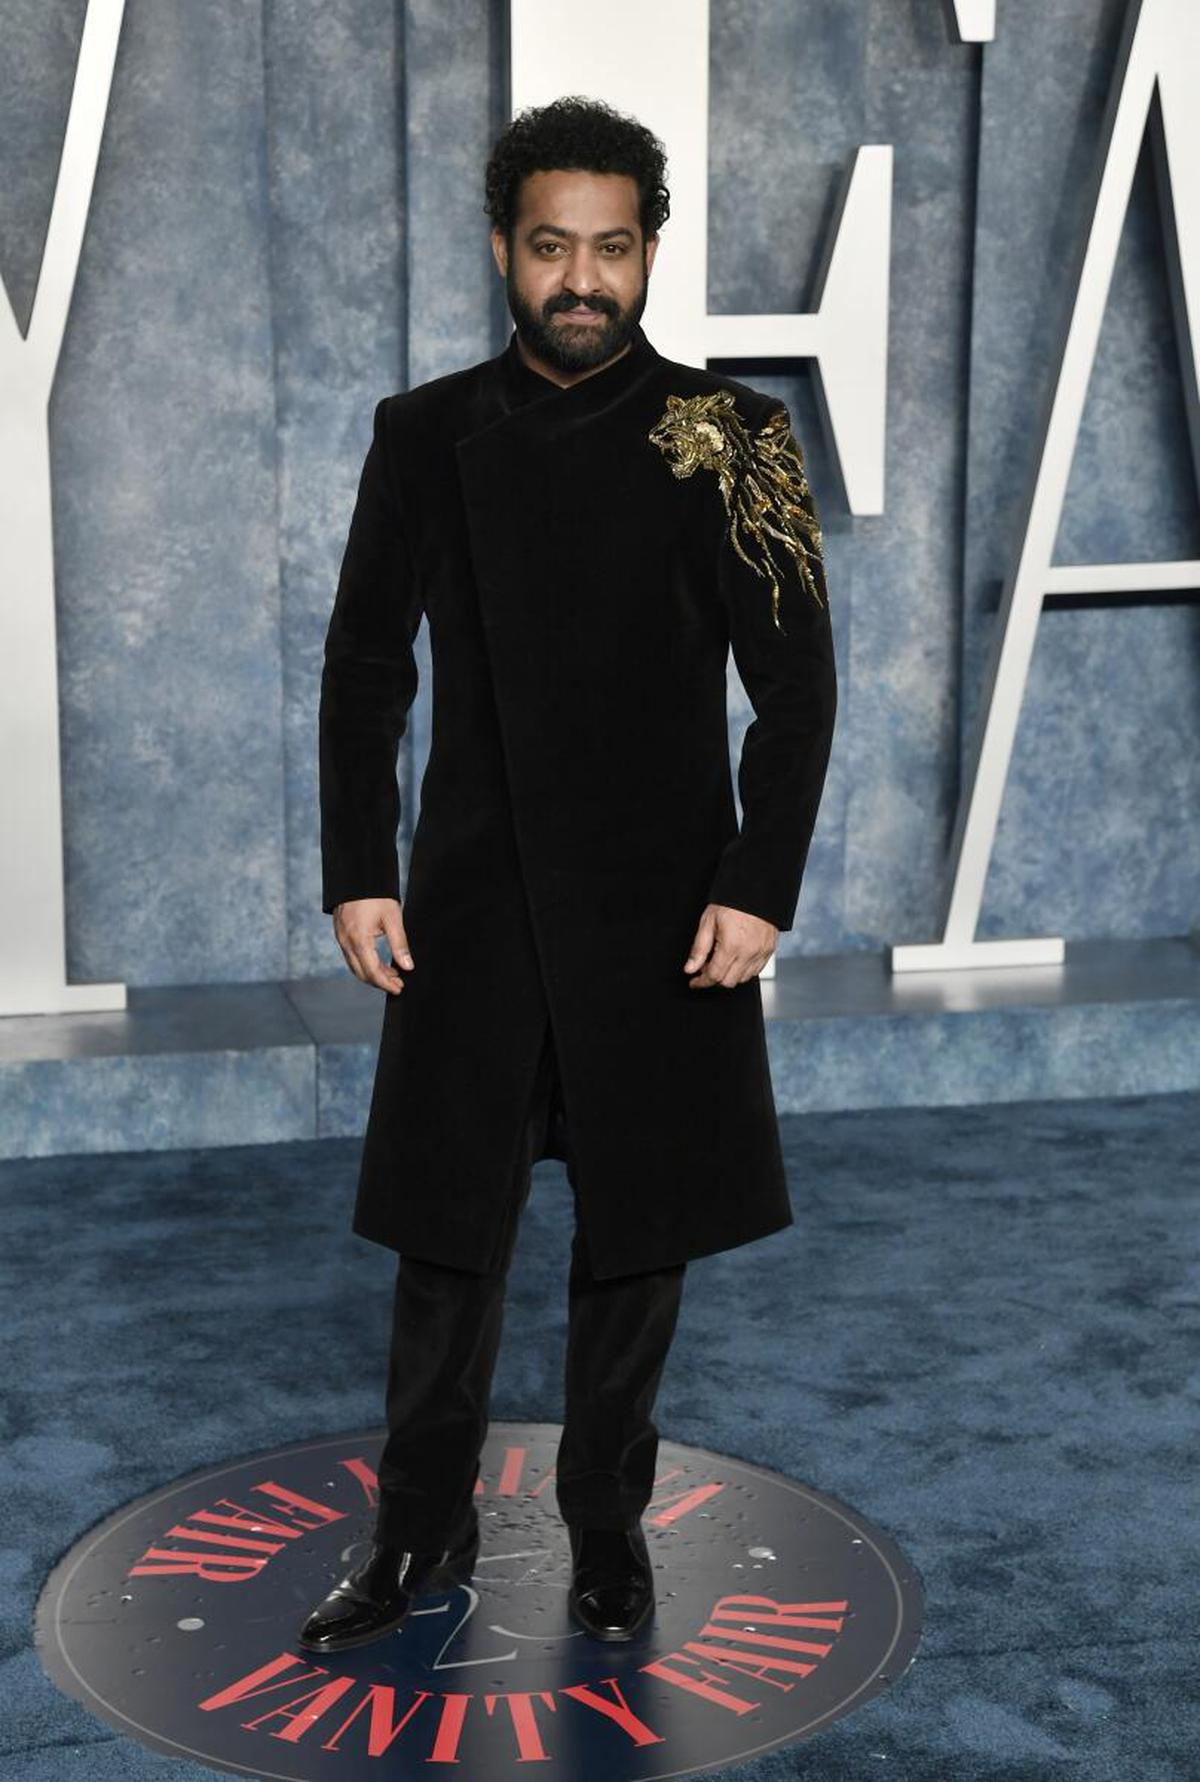 Jr. NTR at the Vanity Fair Oscar Party, at the Wallis Annenberg Center for the Performing Arts in Beverly Hills